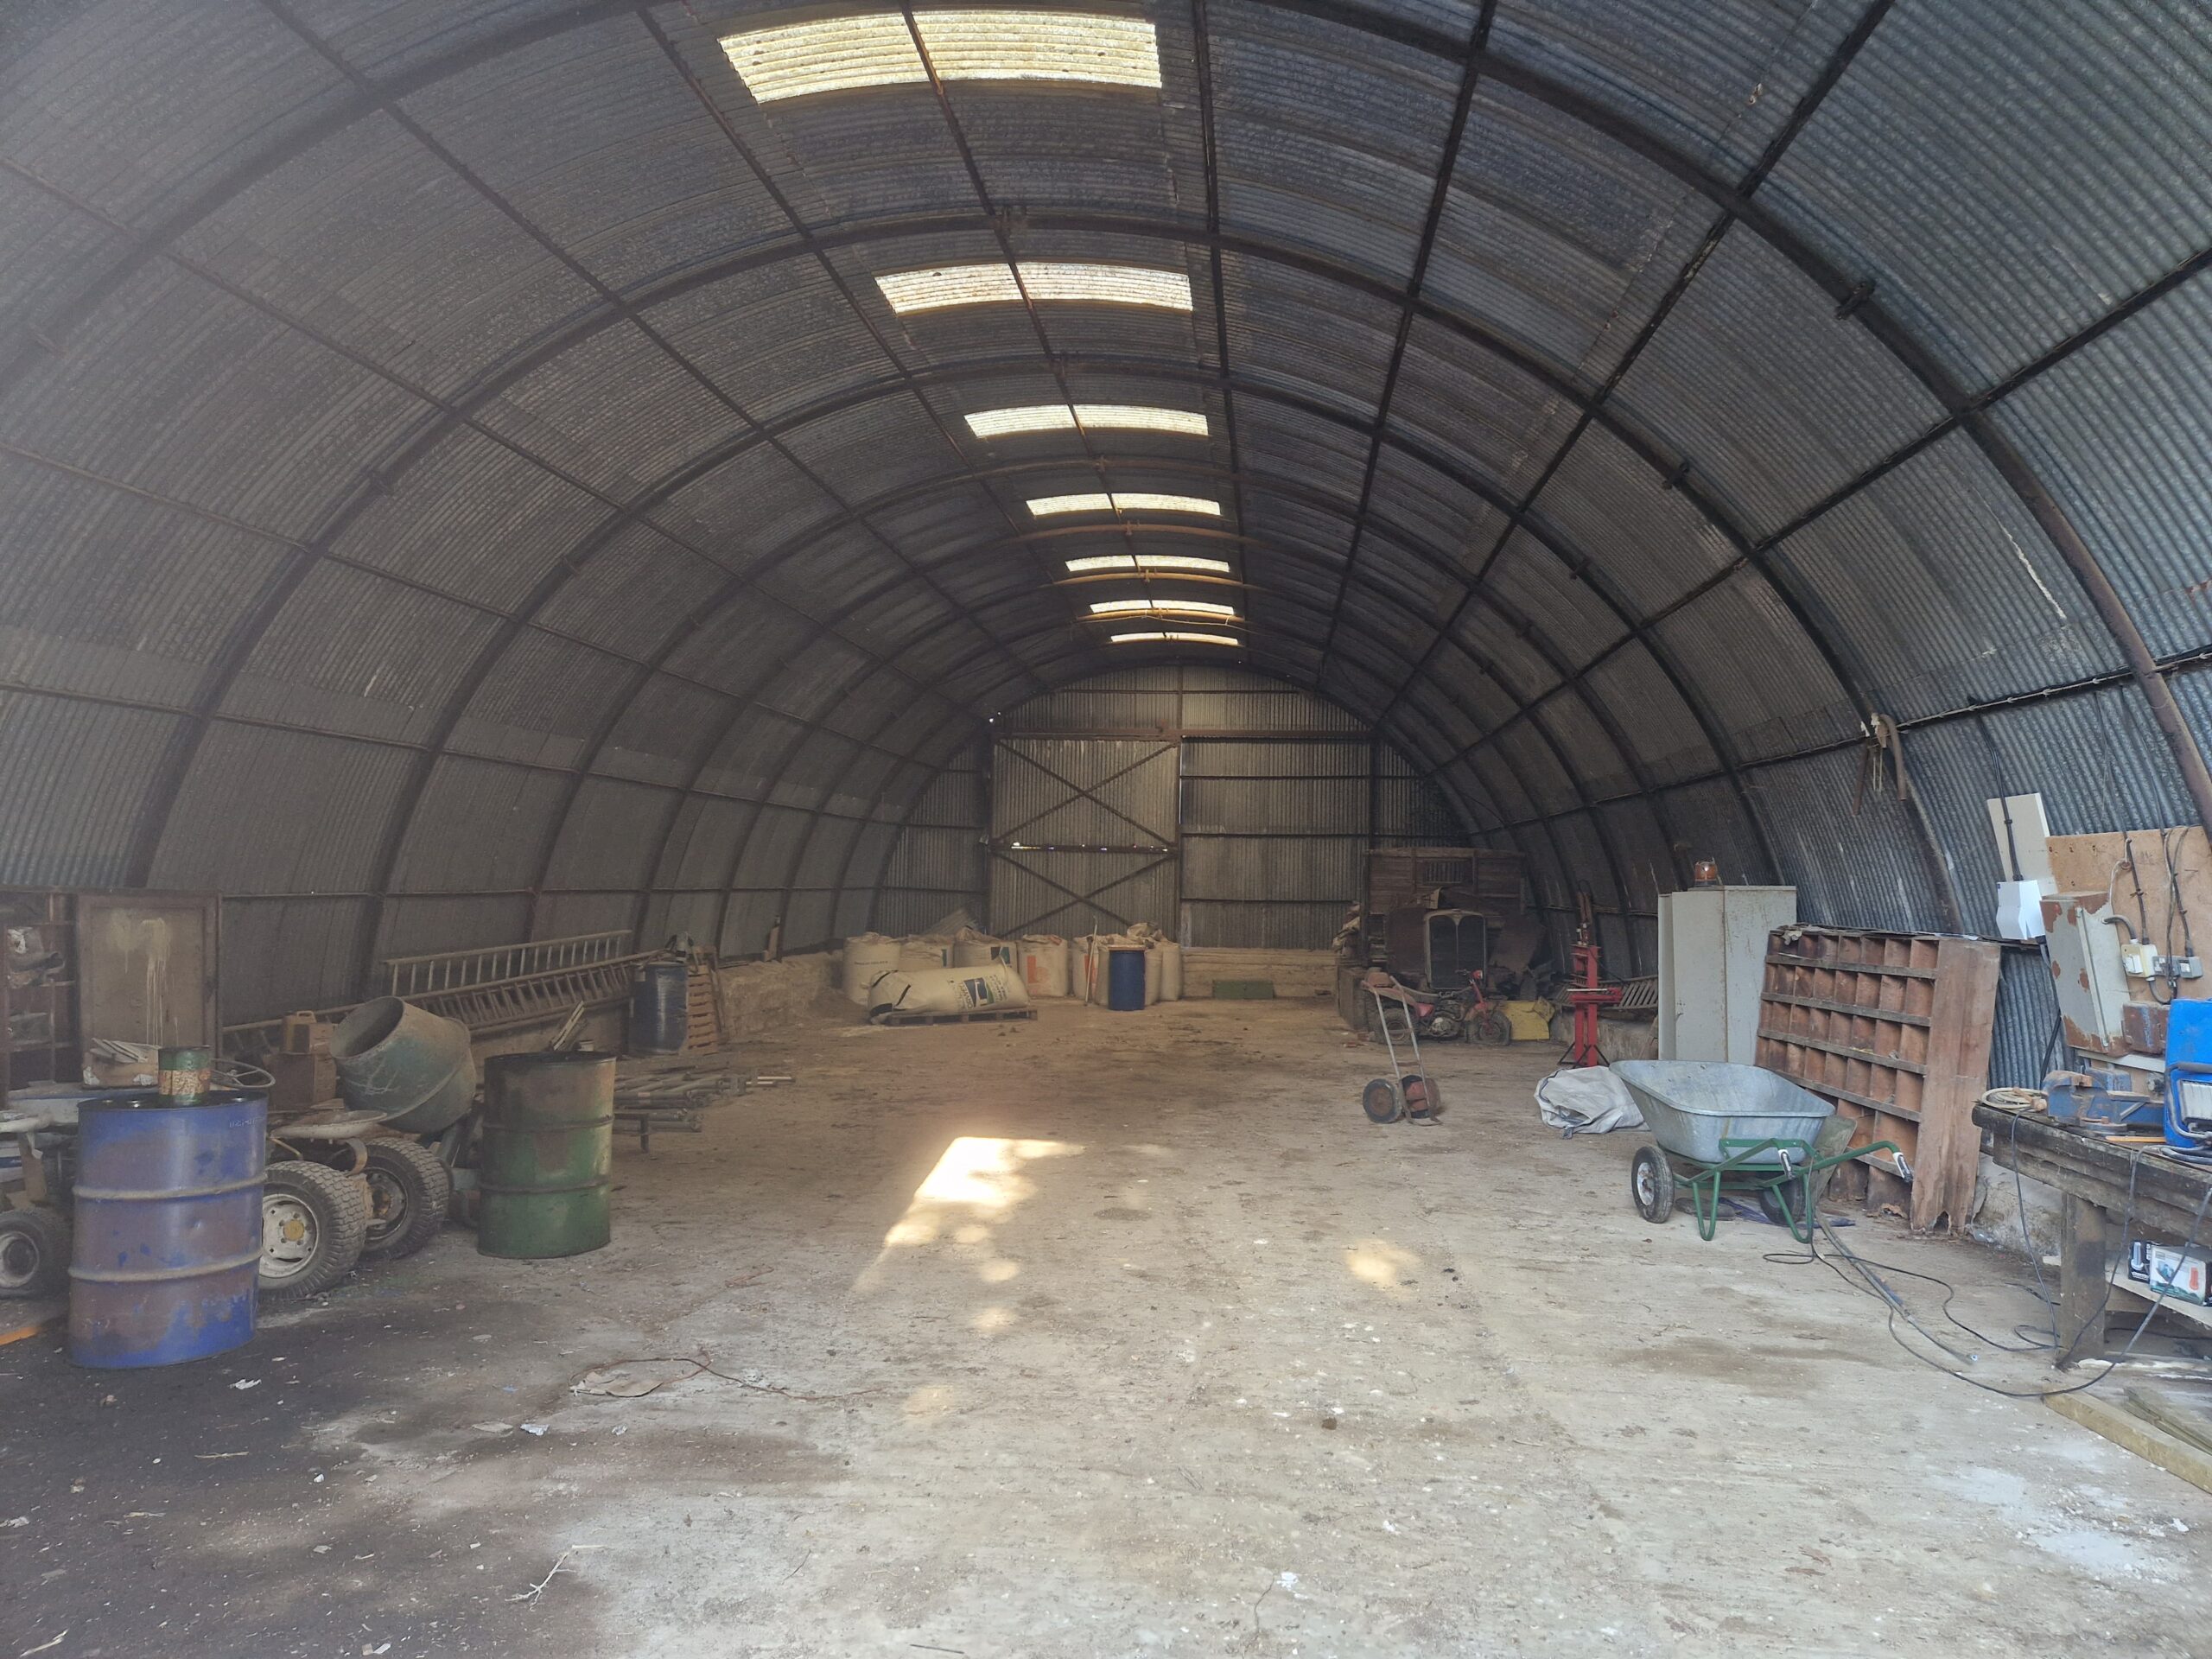 Warehouse/Workshop to Let at Great Chesterford, Saffron Waldon, Essex